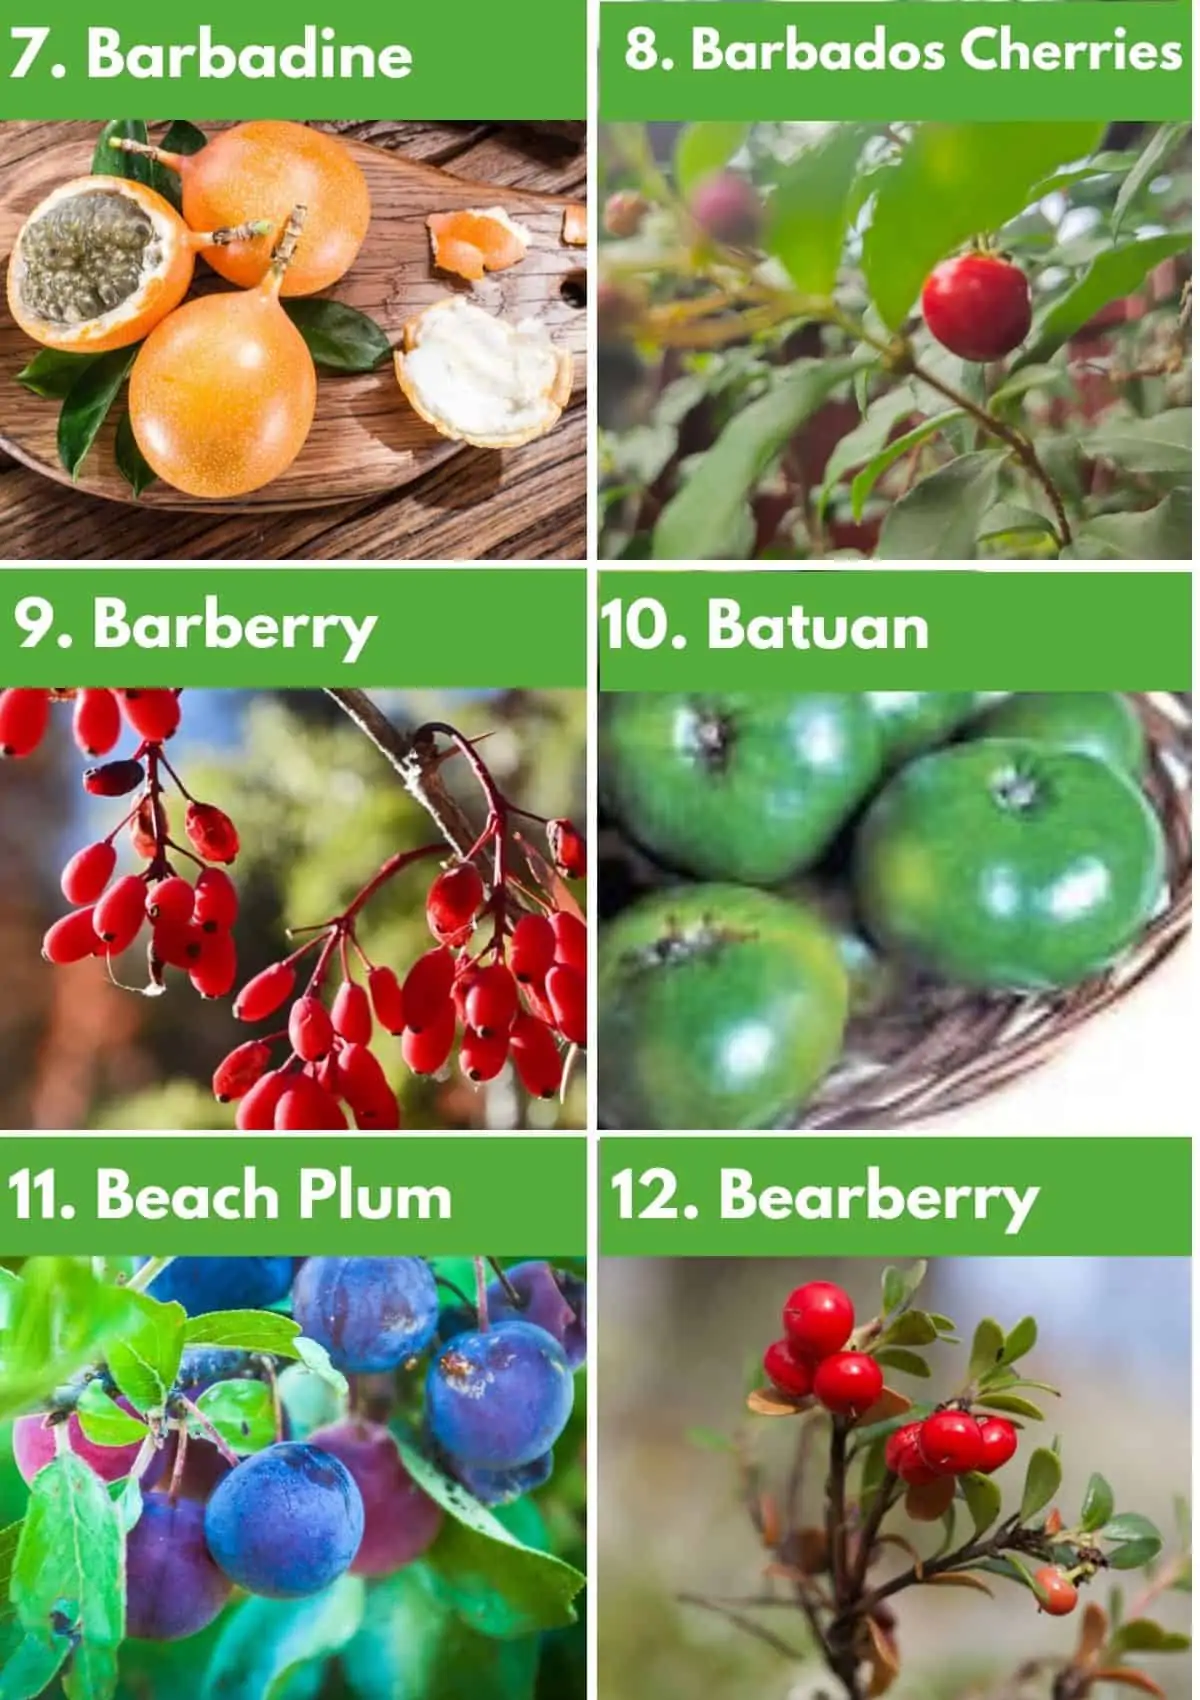 Collage of fruits that start with B: barbadine, barbados cherries, barberry, batuan, beach plum, bearberry.
